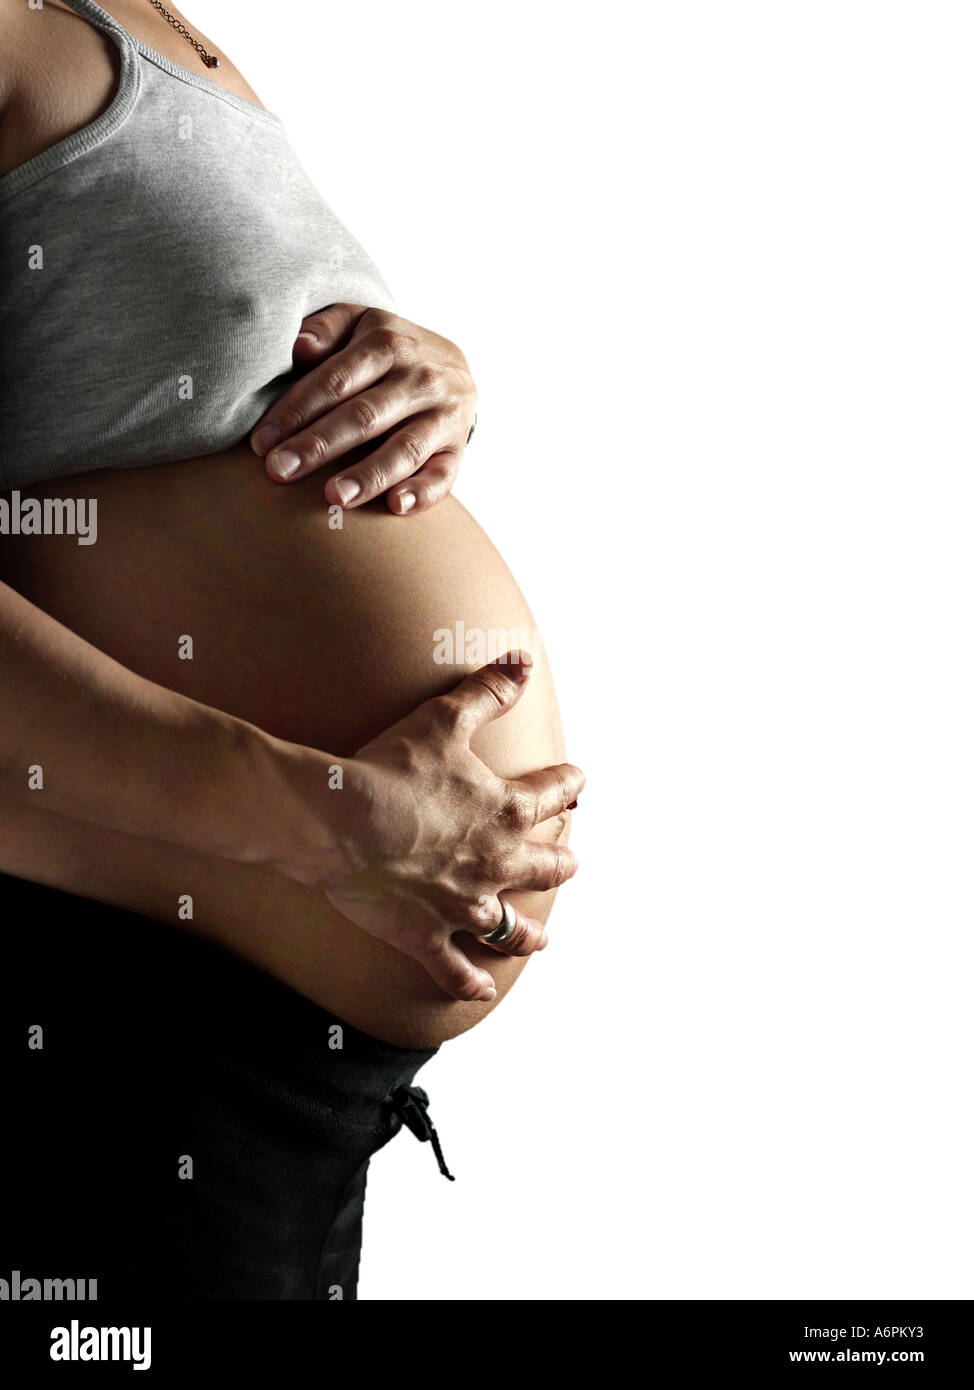 PREGNANT LADY HOLDING TUMMY CUT OUT ON WHITE BACKGROUND Stock Photo - Alamy